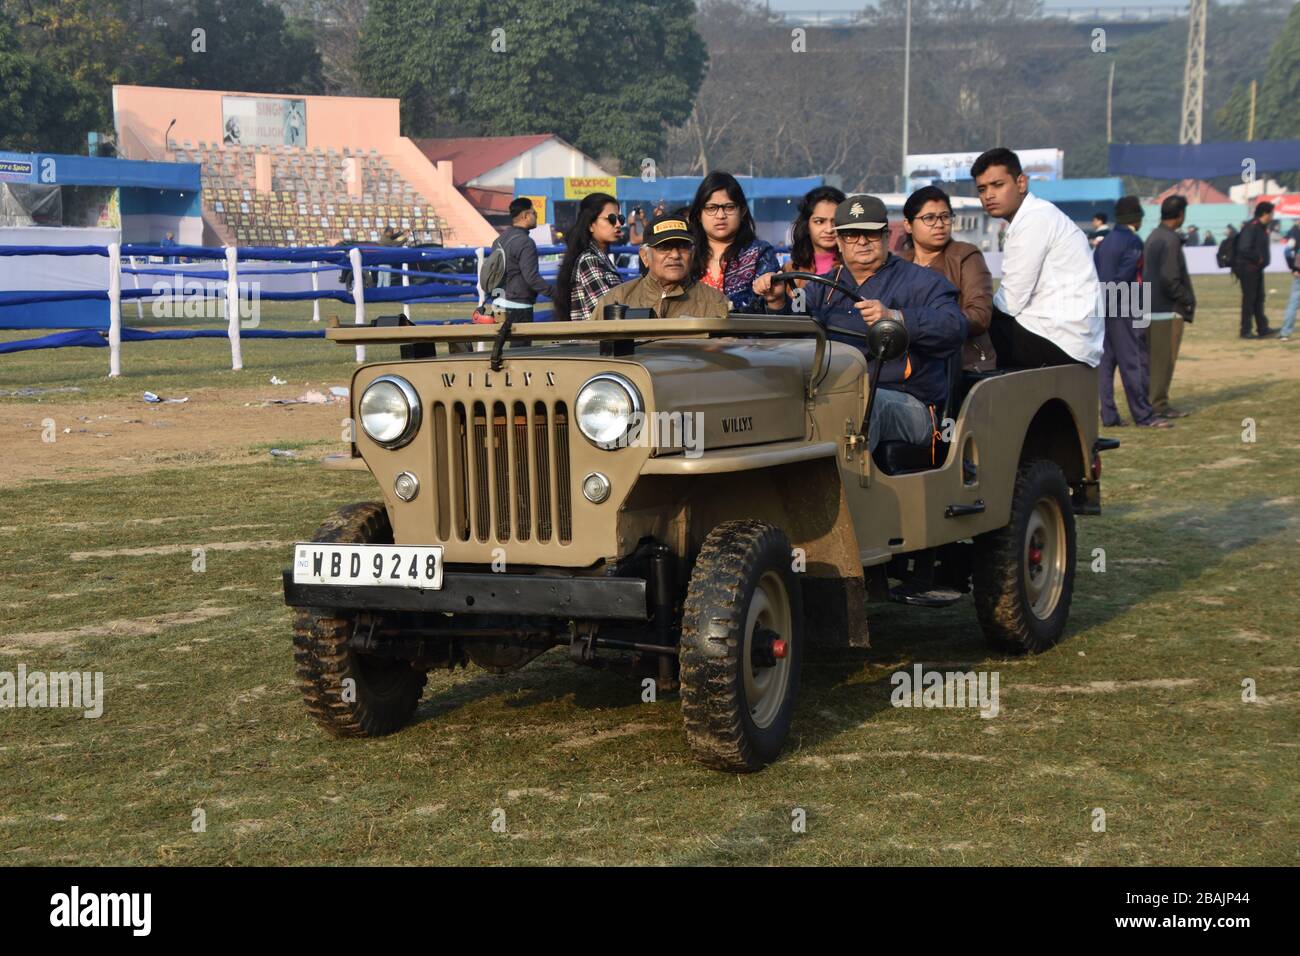 1954 Willys Jeep with 15 hp and 4 cylinder engine. India WBD 9248. Stock Photo